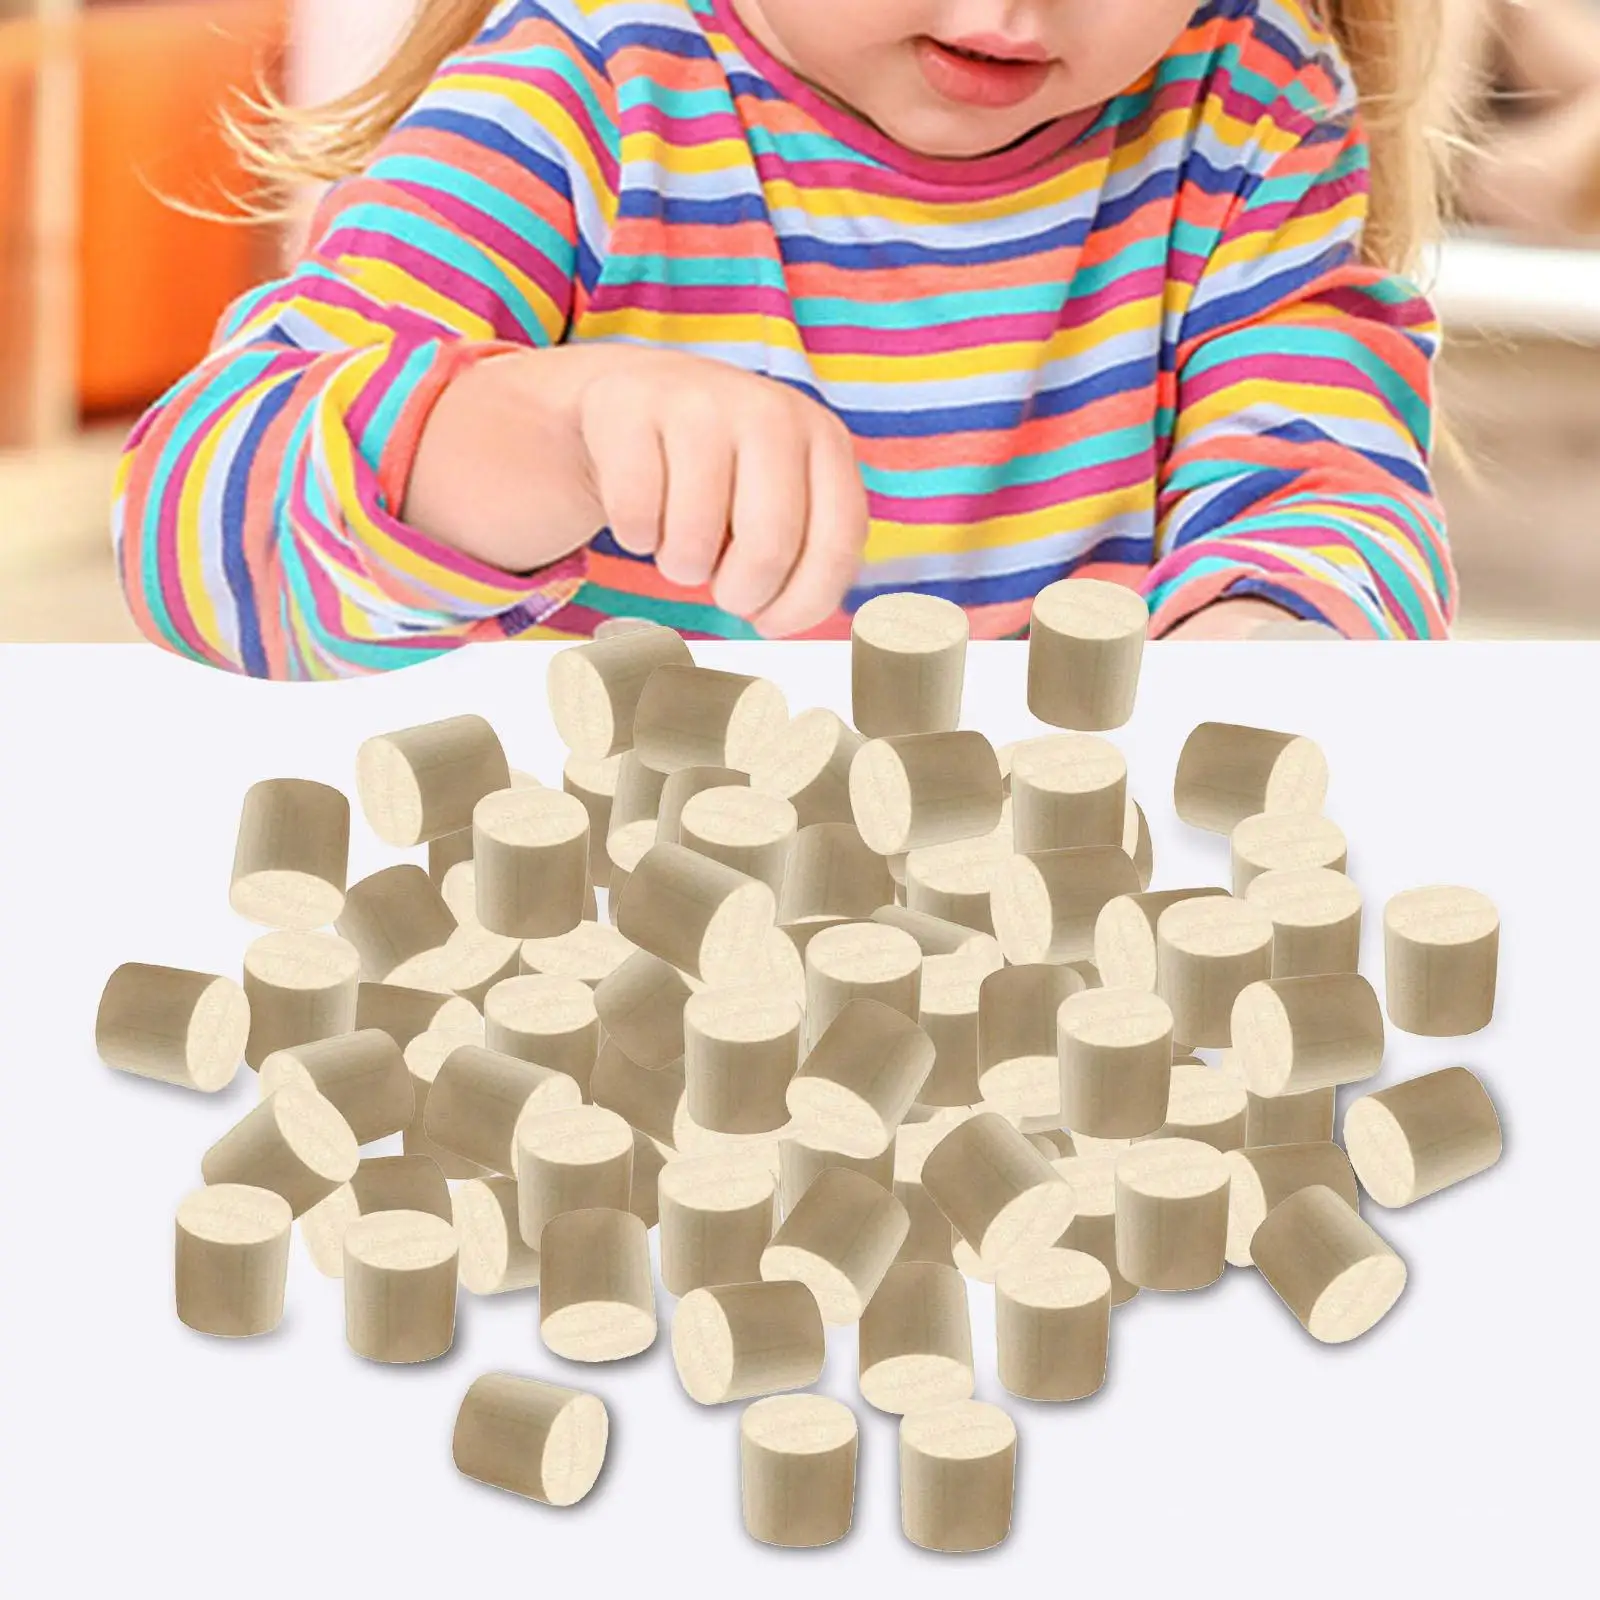 100Pcs Blocks Cylinder Blocks Educational Learning Toy Teaching Aids Material for Kids